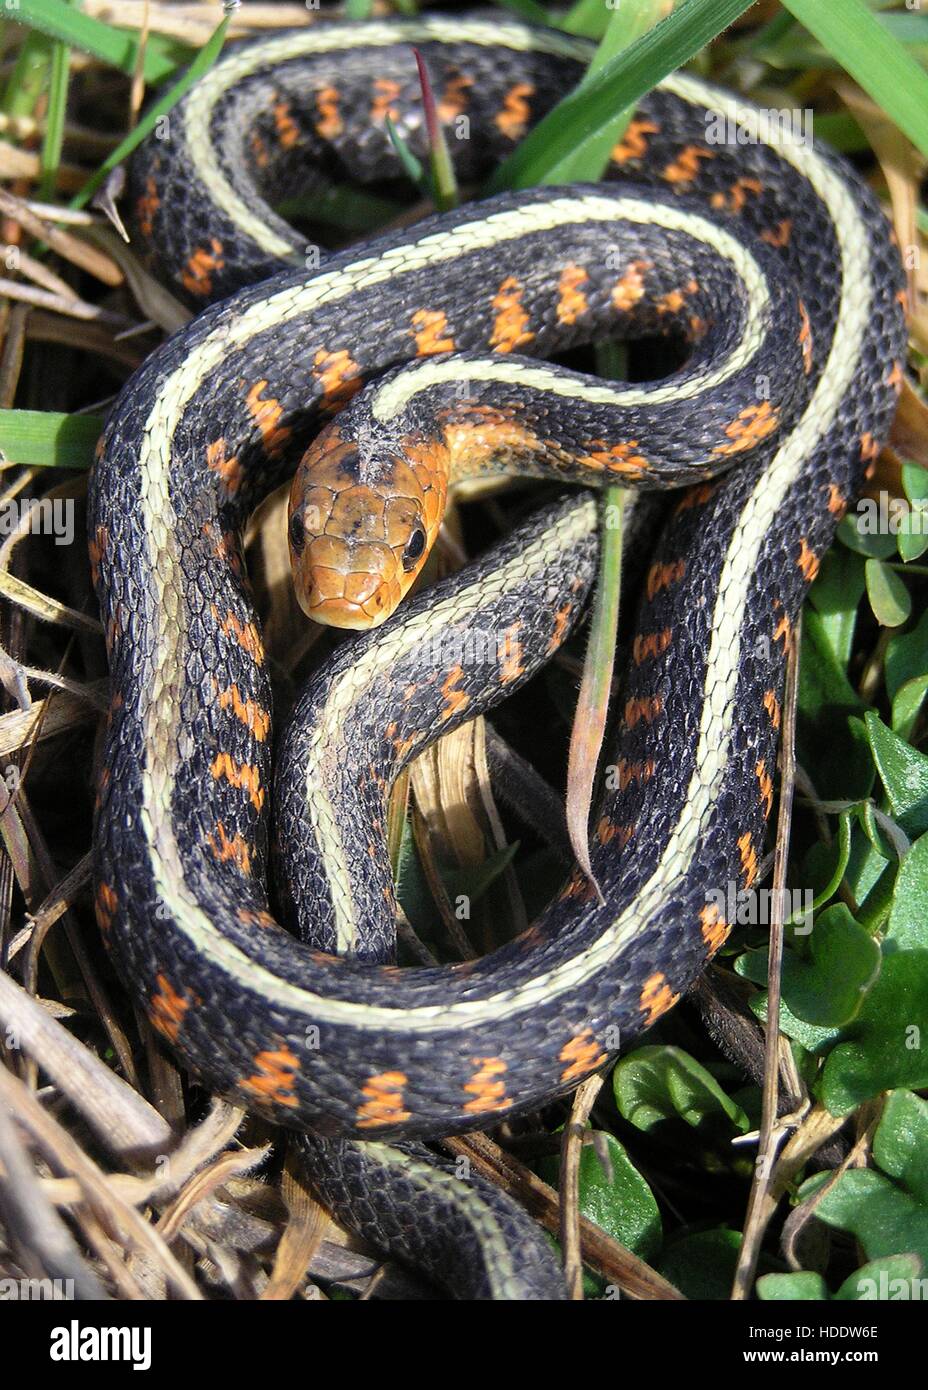 A black Oregon Red-Spotted common garter snake with red spots and a white stripe down its back lies on the forest floor February 5, 2010 in the Willamette Valley, Oregon. Stock Photo